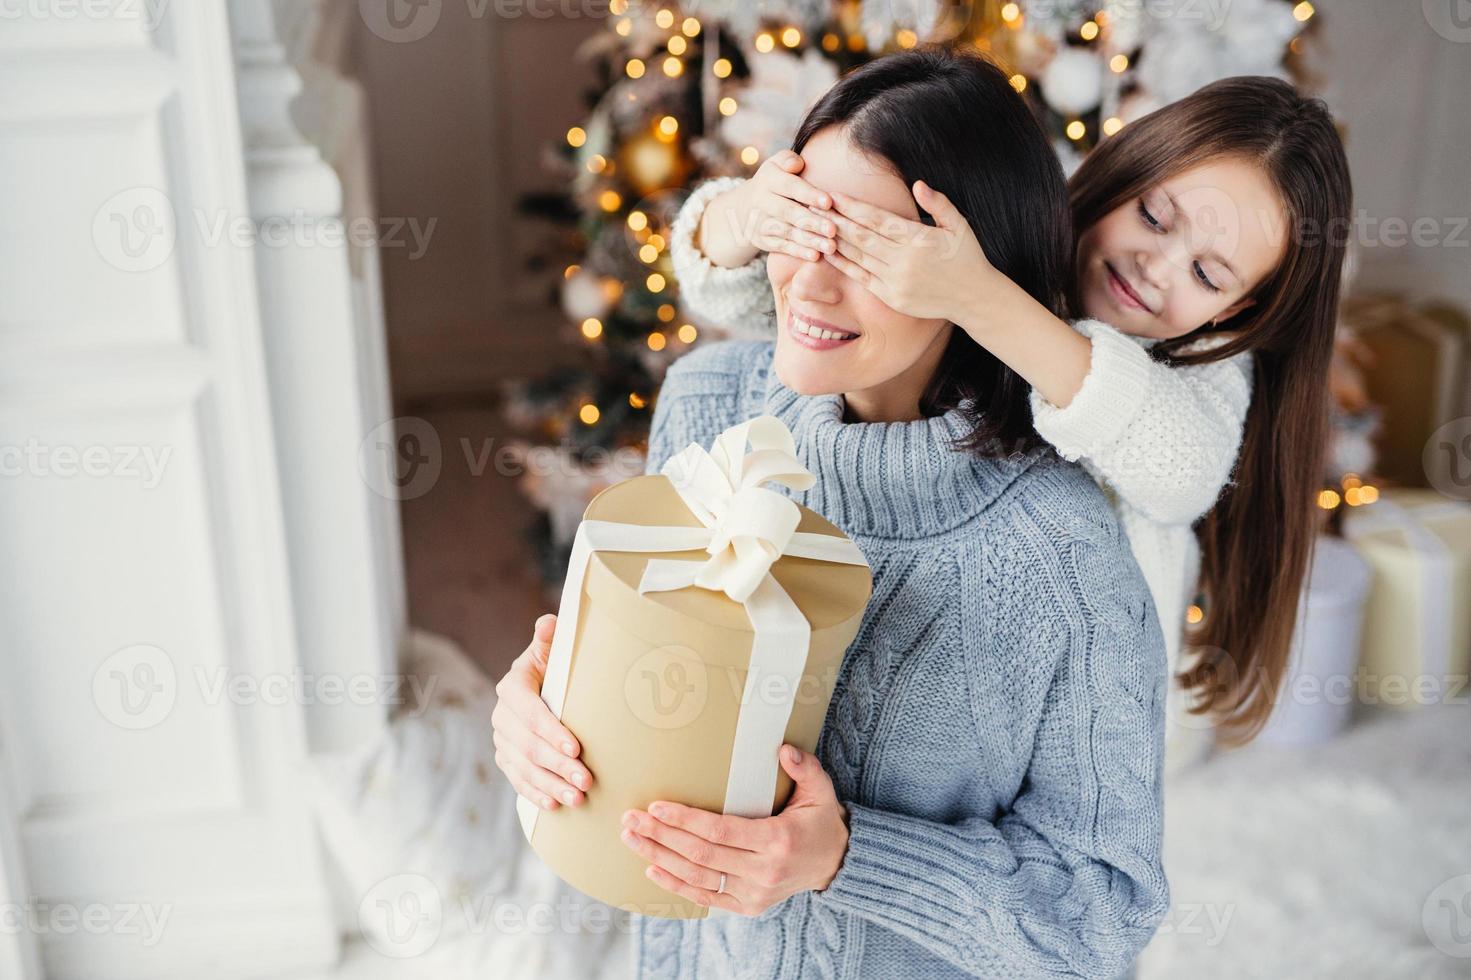 Small adorable female kid prepares surprise for her mother, closes eyes and gives wrapped present as stand at New Year background. Pretty female recieves gift from daughter. Surprisment concept photo